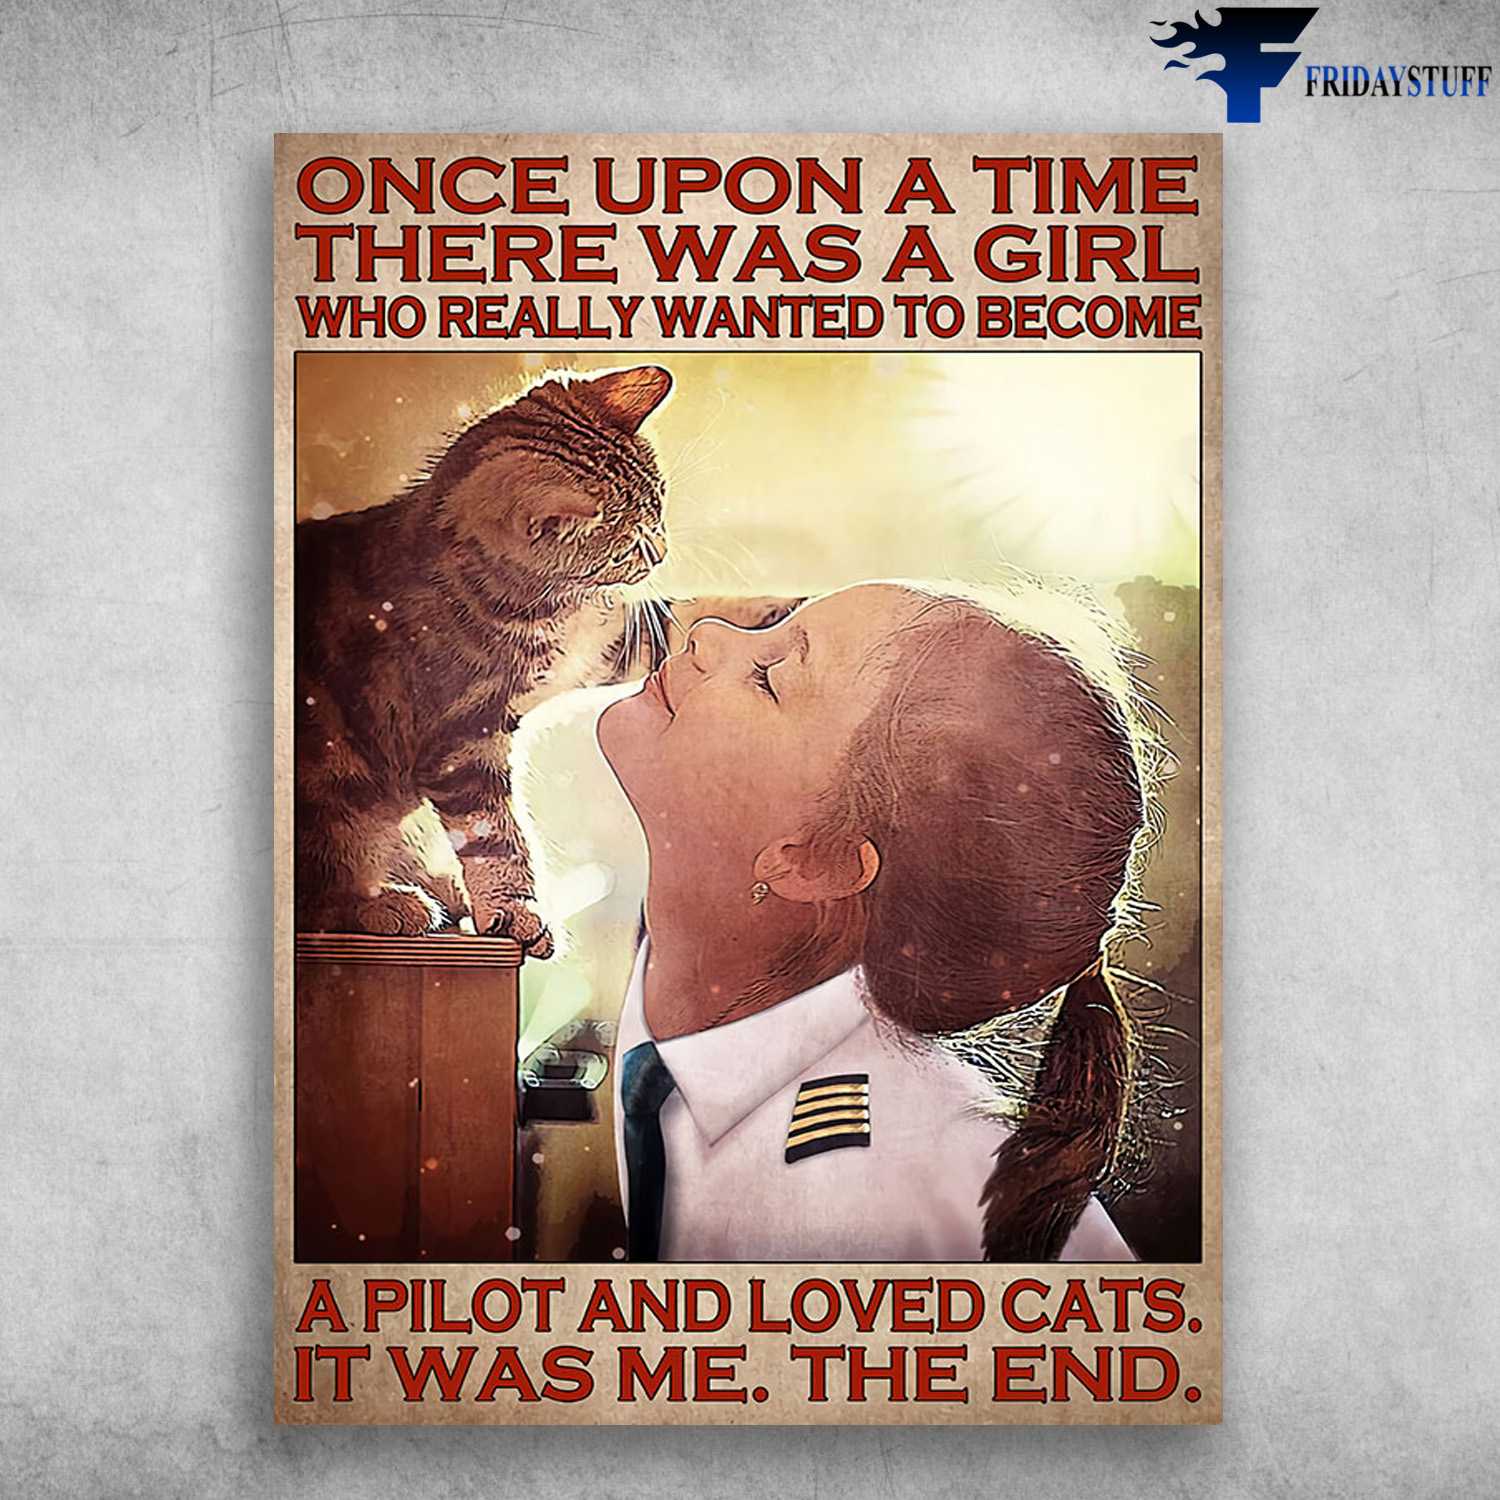 Pilot Girl, Cat Lover, Once Upon A Time, There Was A Girl, Who Wanted To Become A Pilot, And Loved Cats, It Was Me The End